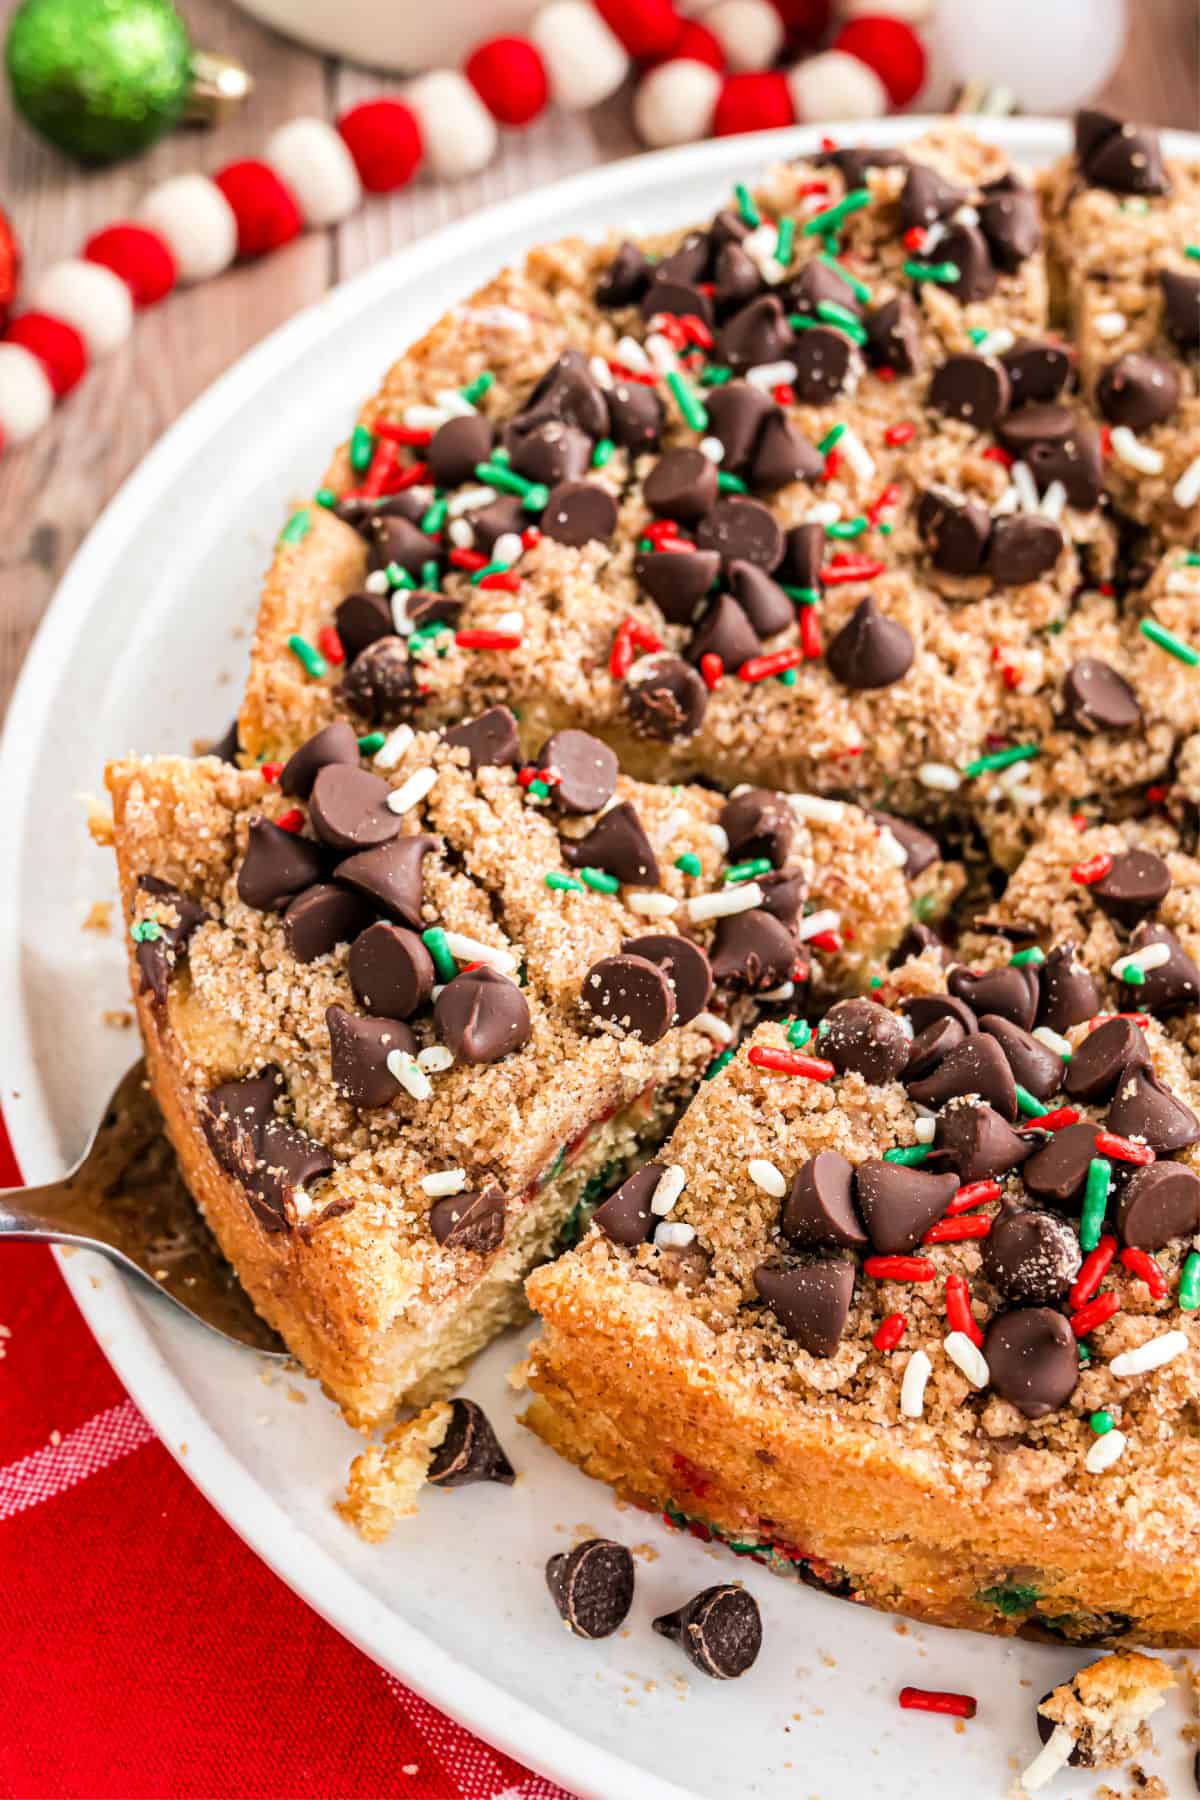 Chocolate chip coffee cake with holiday sprinkles.